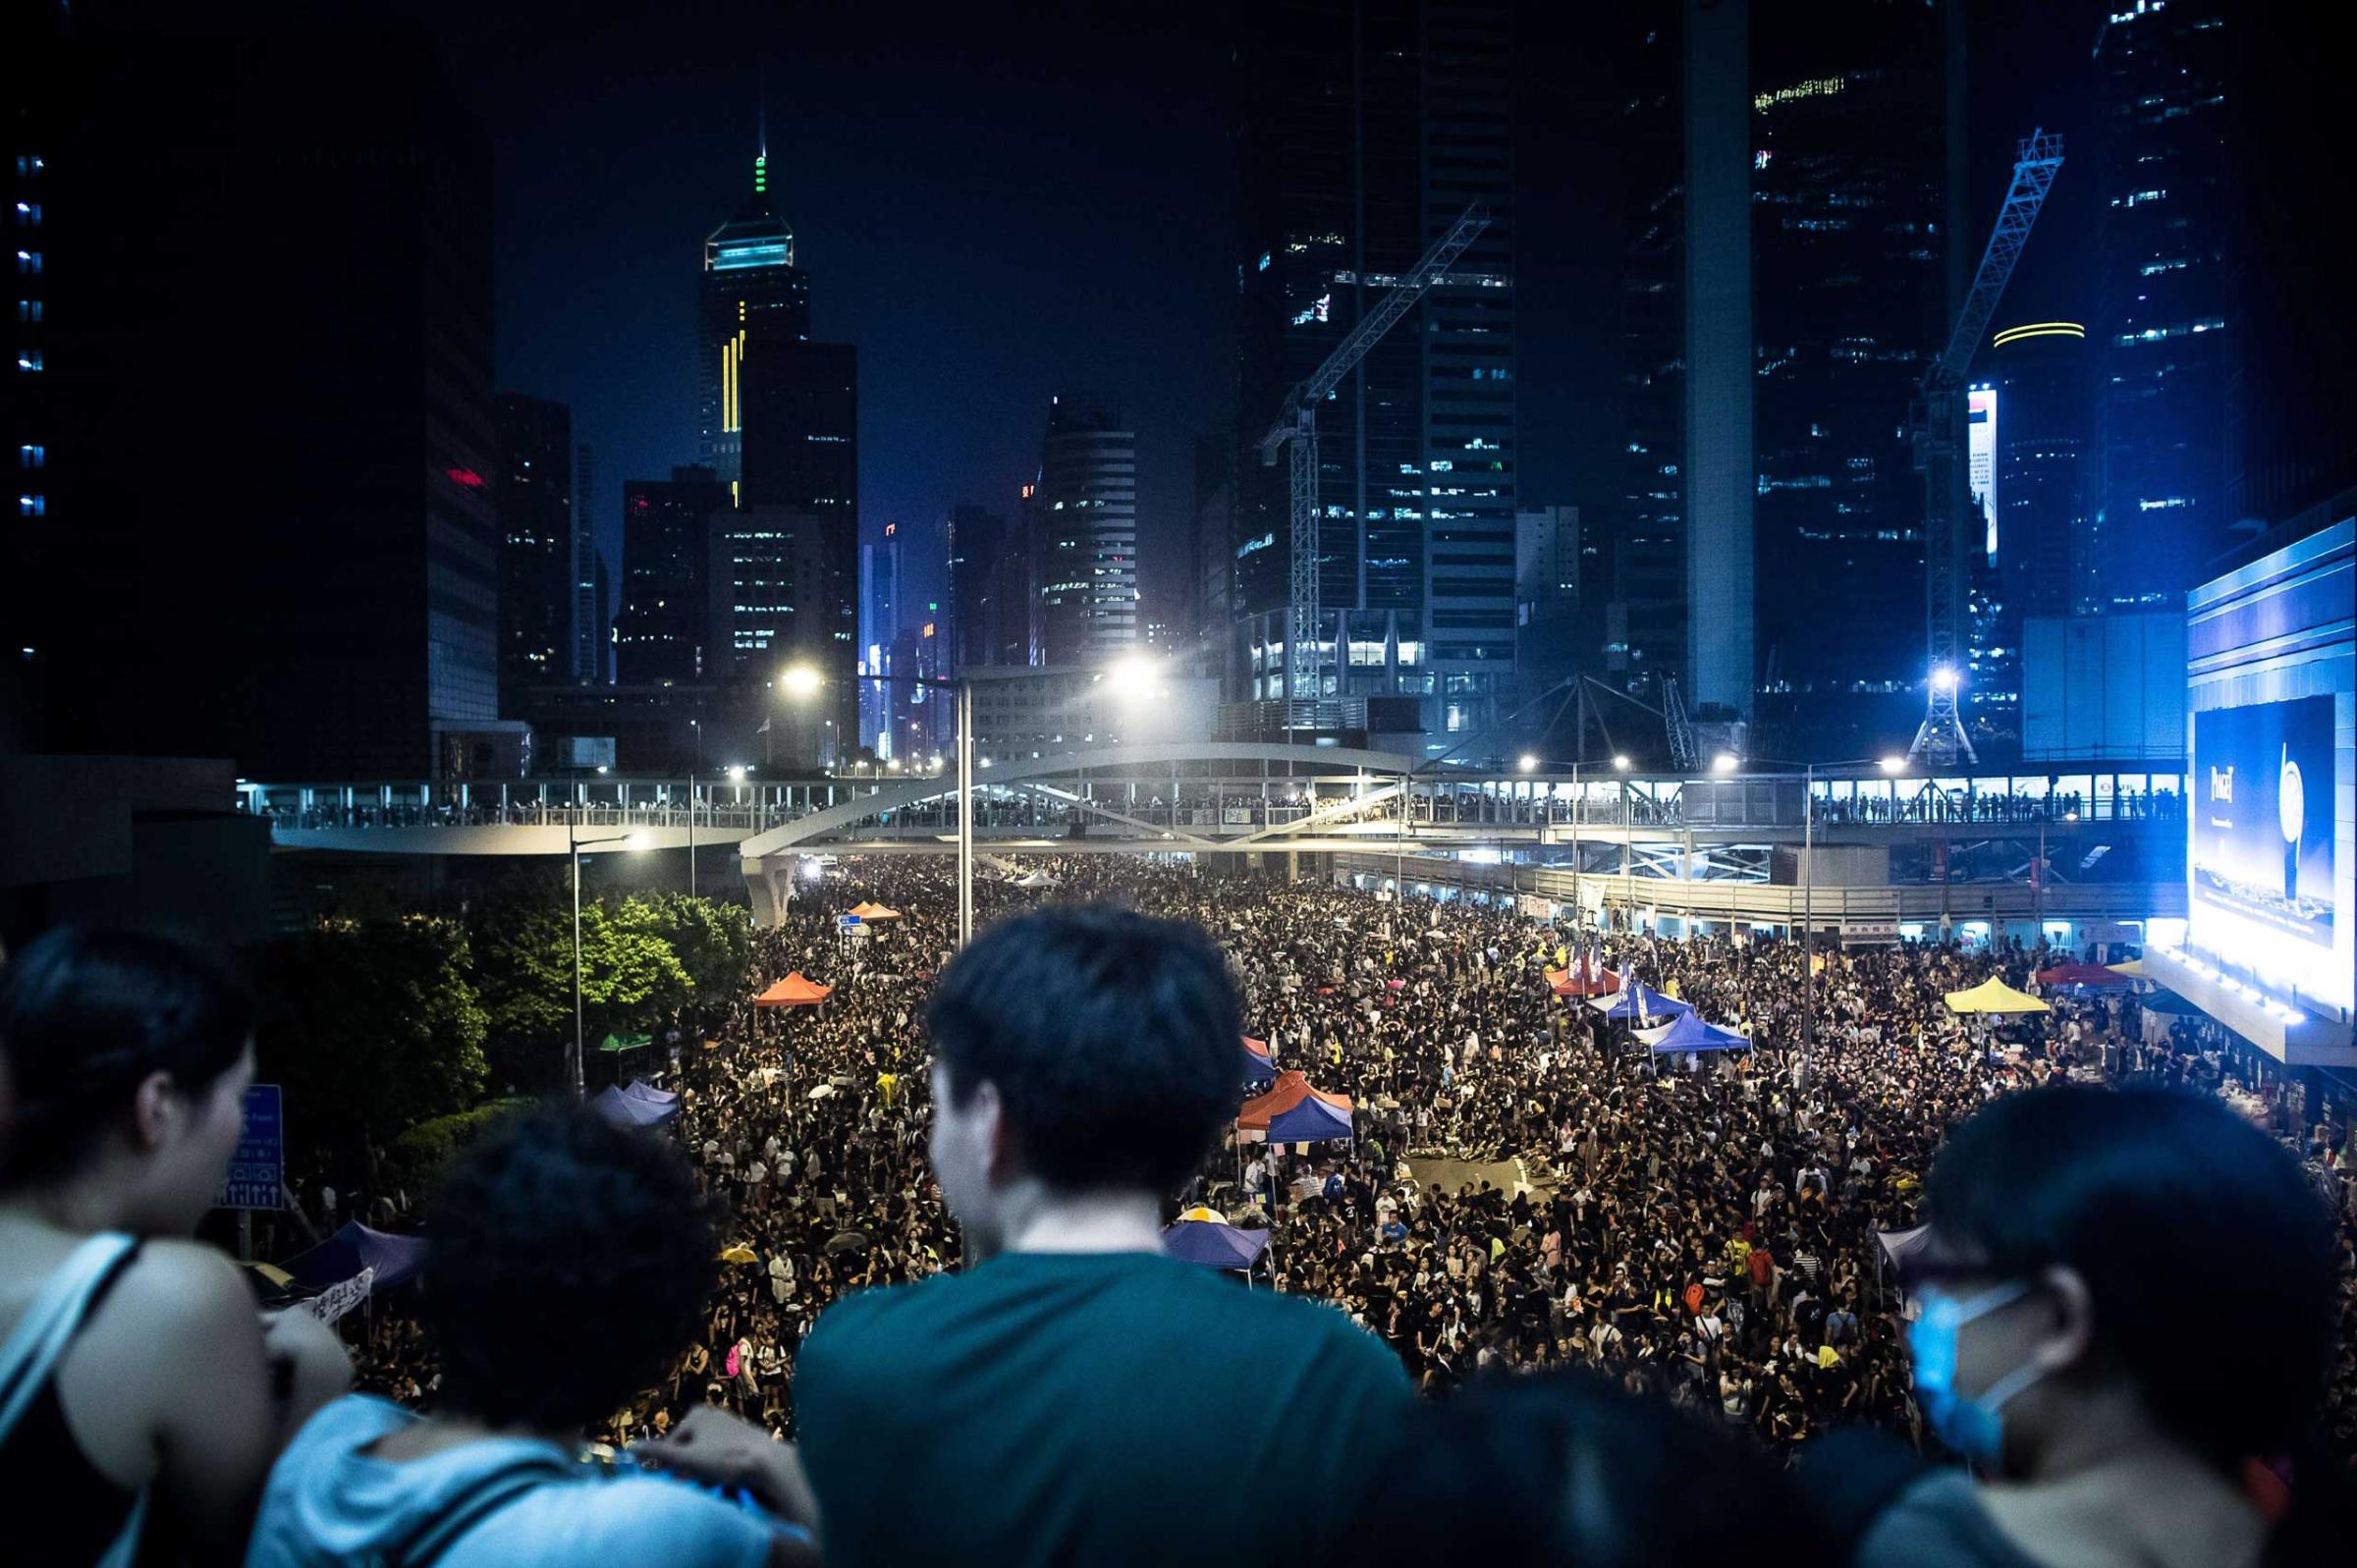 Pro-democracy demonstrators gather for the third night in Hong Kong on Sept. 30, 2014.